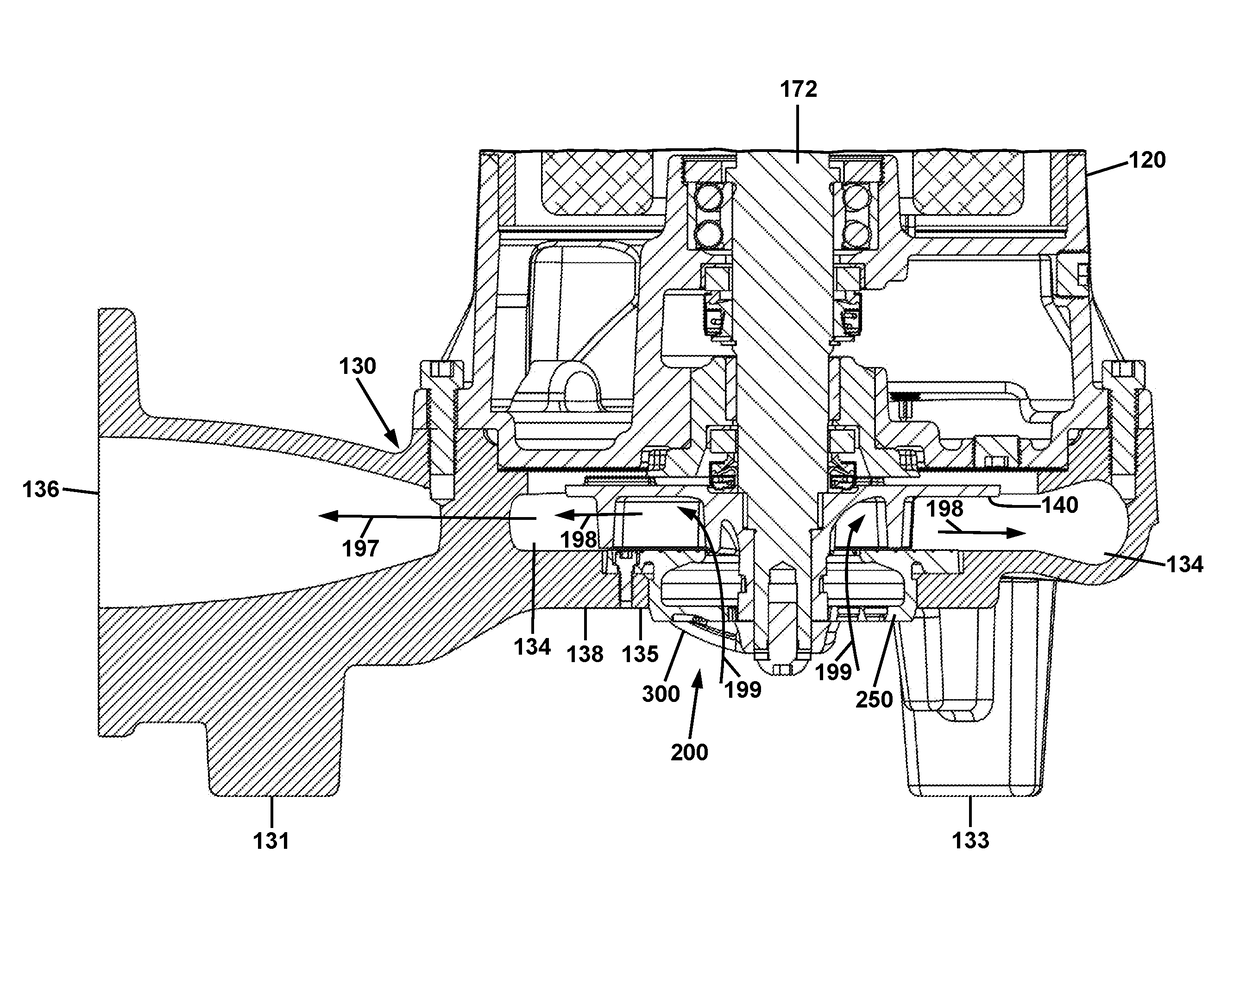 Grinder pump and cutting assembly thereof